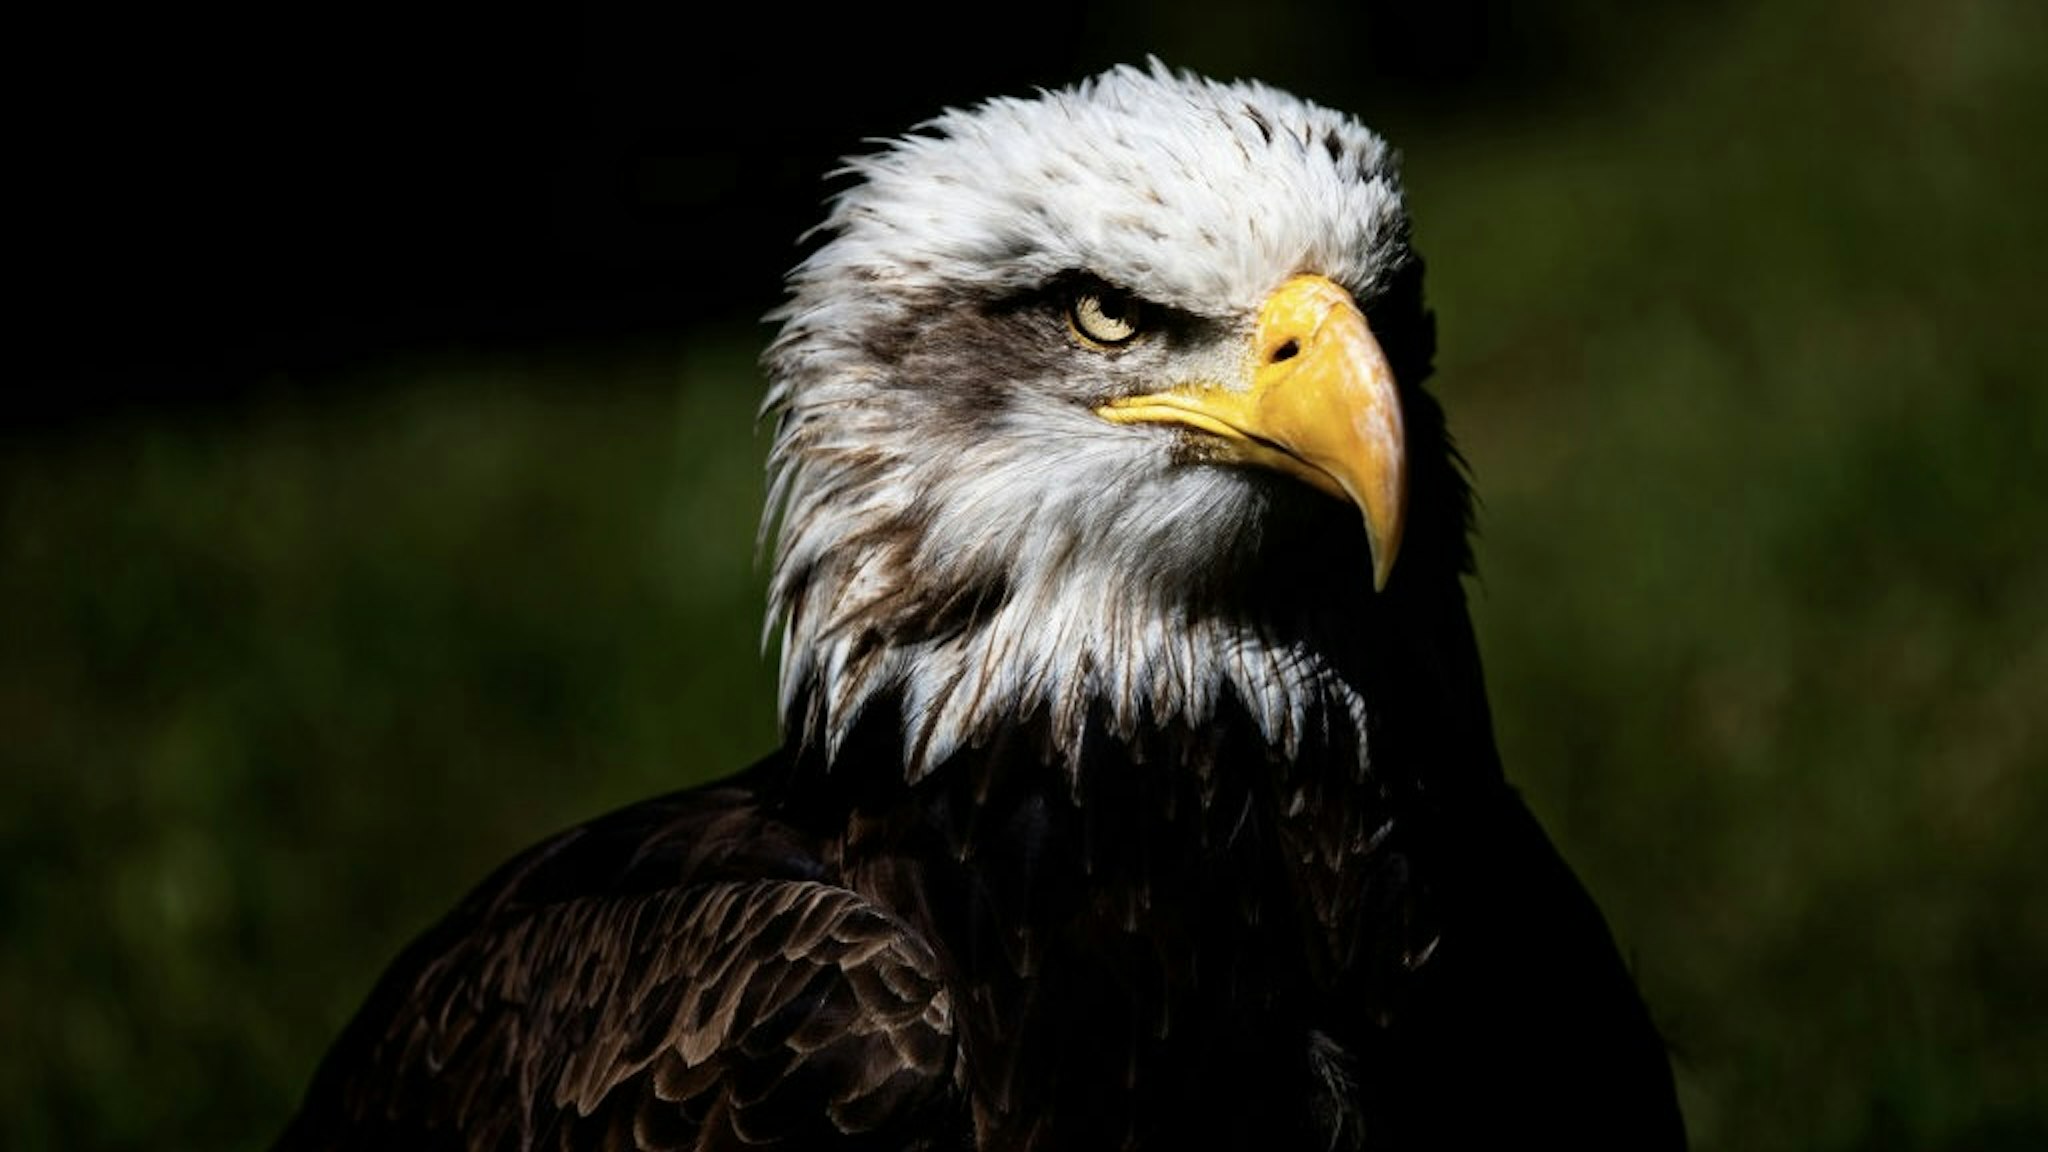 Portraits Of Zoo Animals During Coronavirus Lockdown SANTANDER, SPAIN - MAY 26:The bald eagle also known as the American eagle, white-headed eagle, white-headed eagle or American eagle is an accipitriform bird of prey of the Accipitridae family, which inhabits North America, from southern Canada to Baja California Sur and Sonora in Mexico. It is a large blackish eagle with a white tail and head. It is the national symbol of the United States of America Cabarceno nature park gives the animals plenty of space to be as natural as possible on May 26, 2020 in Santander, Spain. (Photo by David S. Bustamante/Soccrates Images/Getty Images) Soccrates Images / Contributor via Getty Images